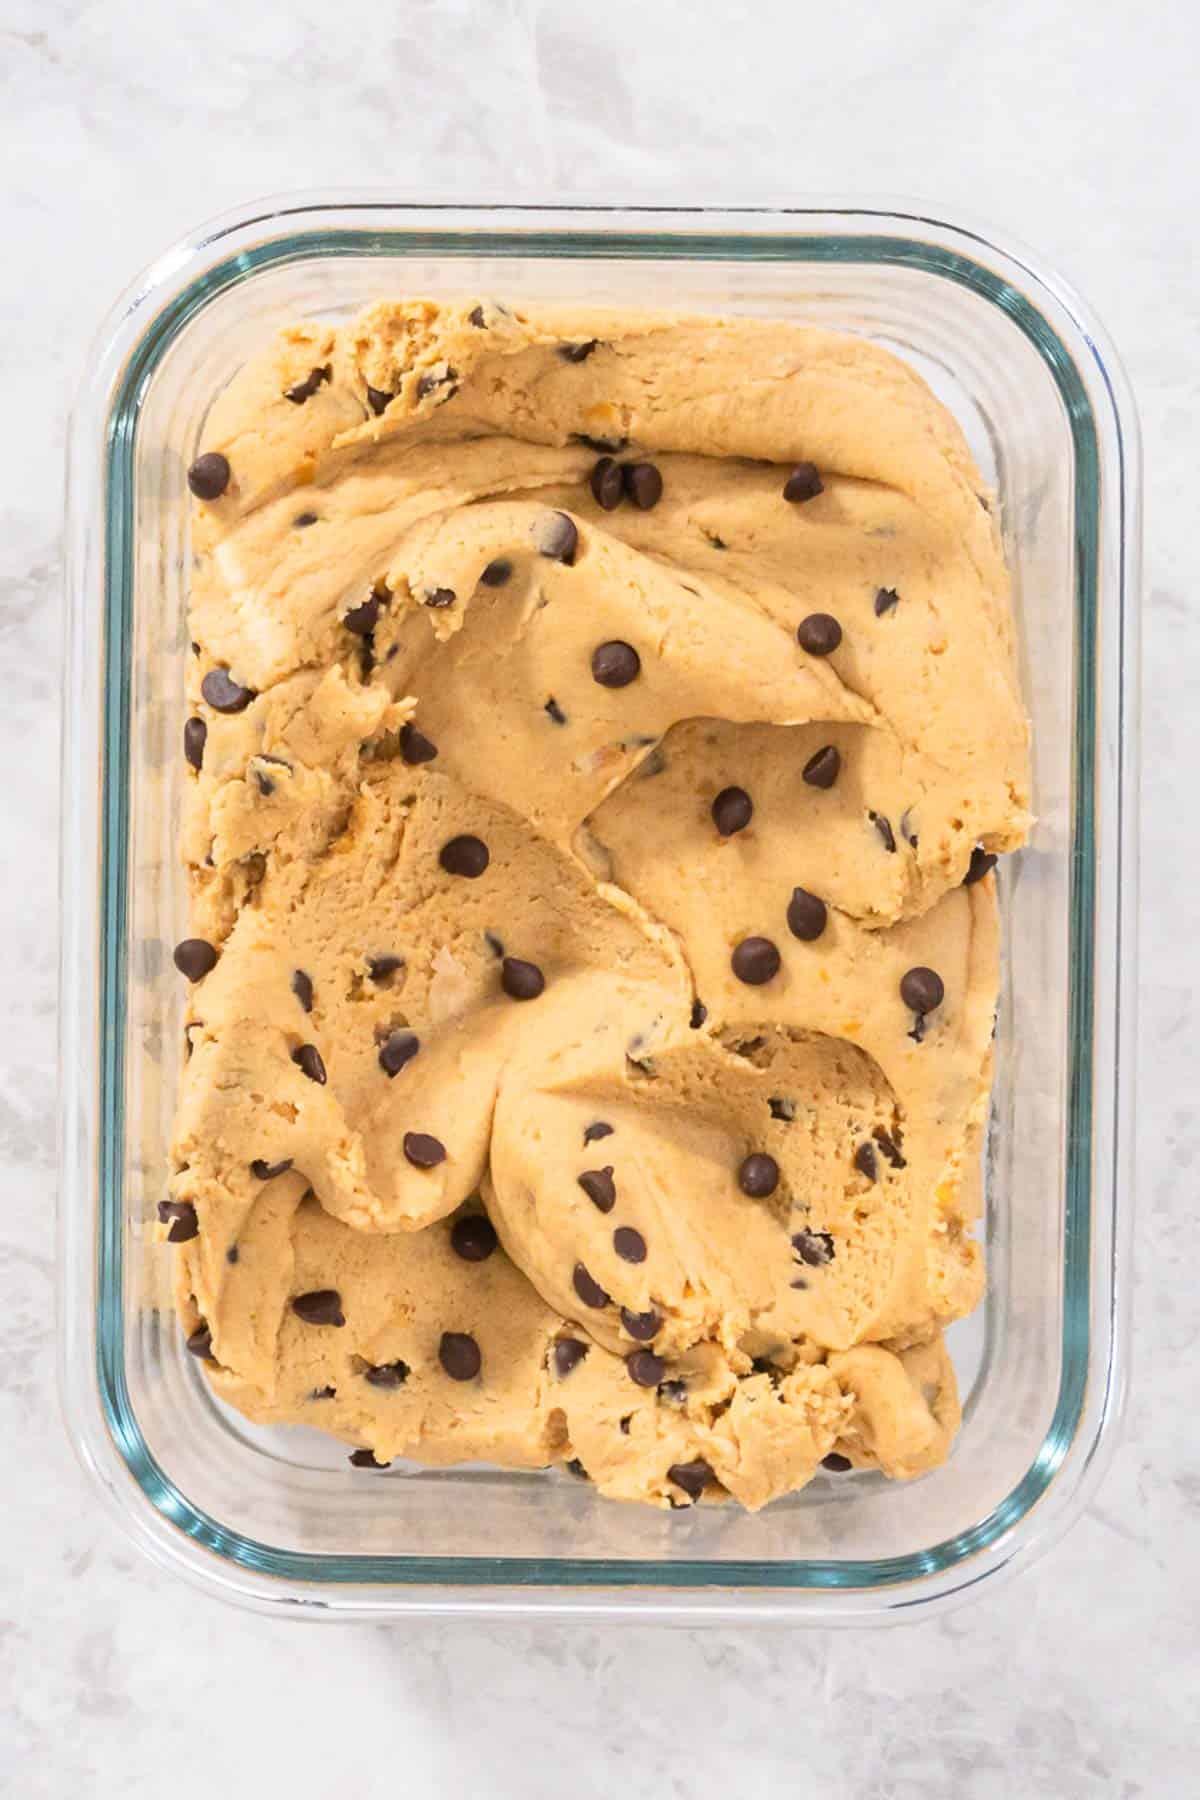 Chickpea cookie dough in a glass container on the counter.